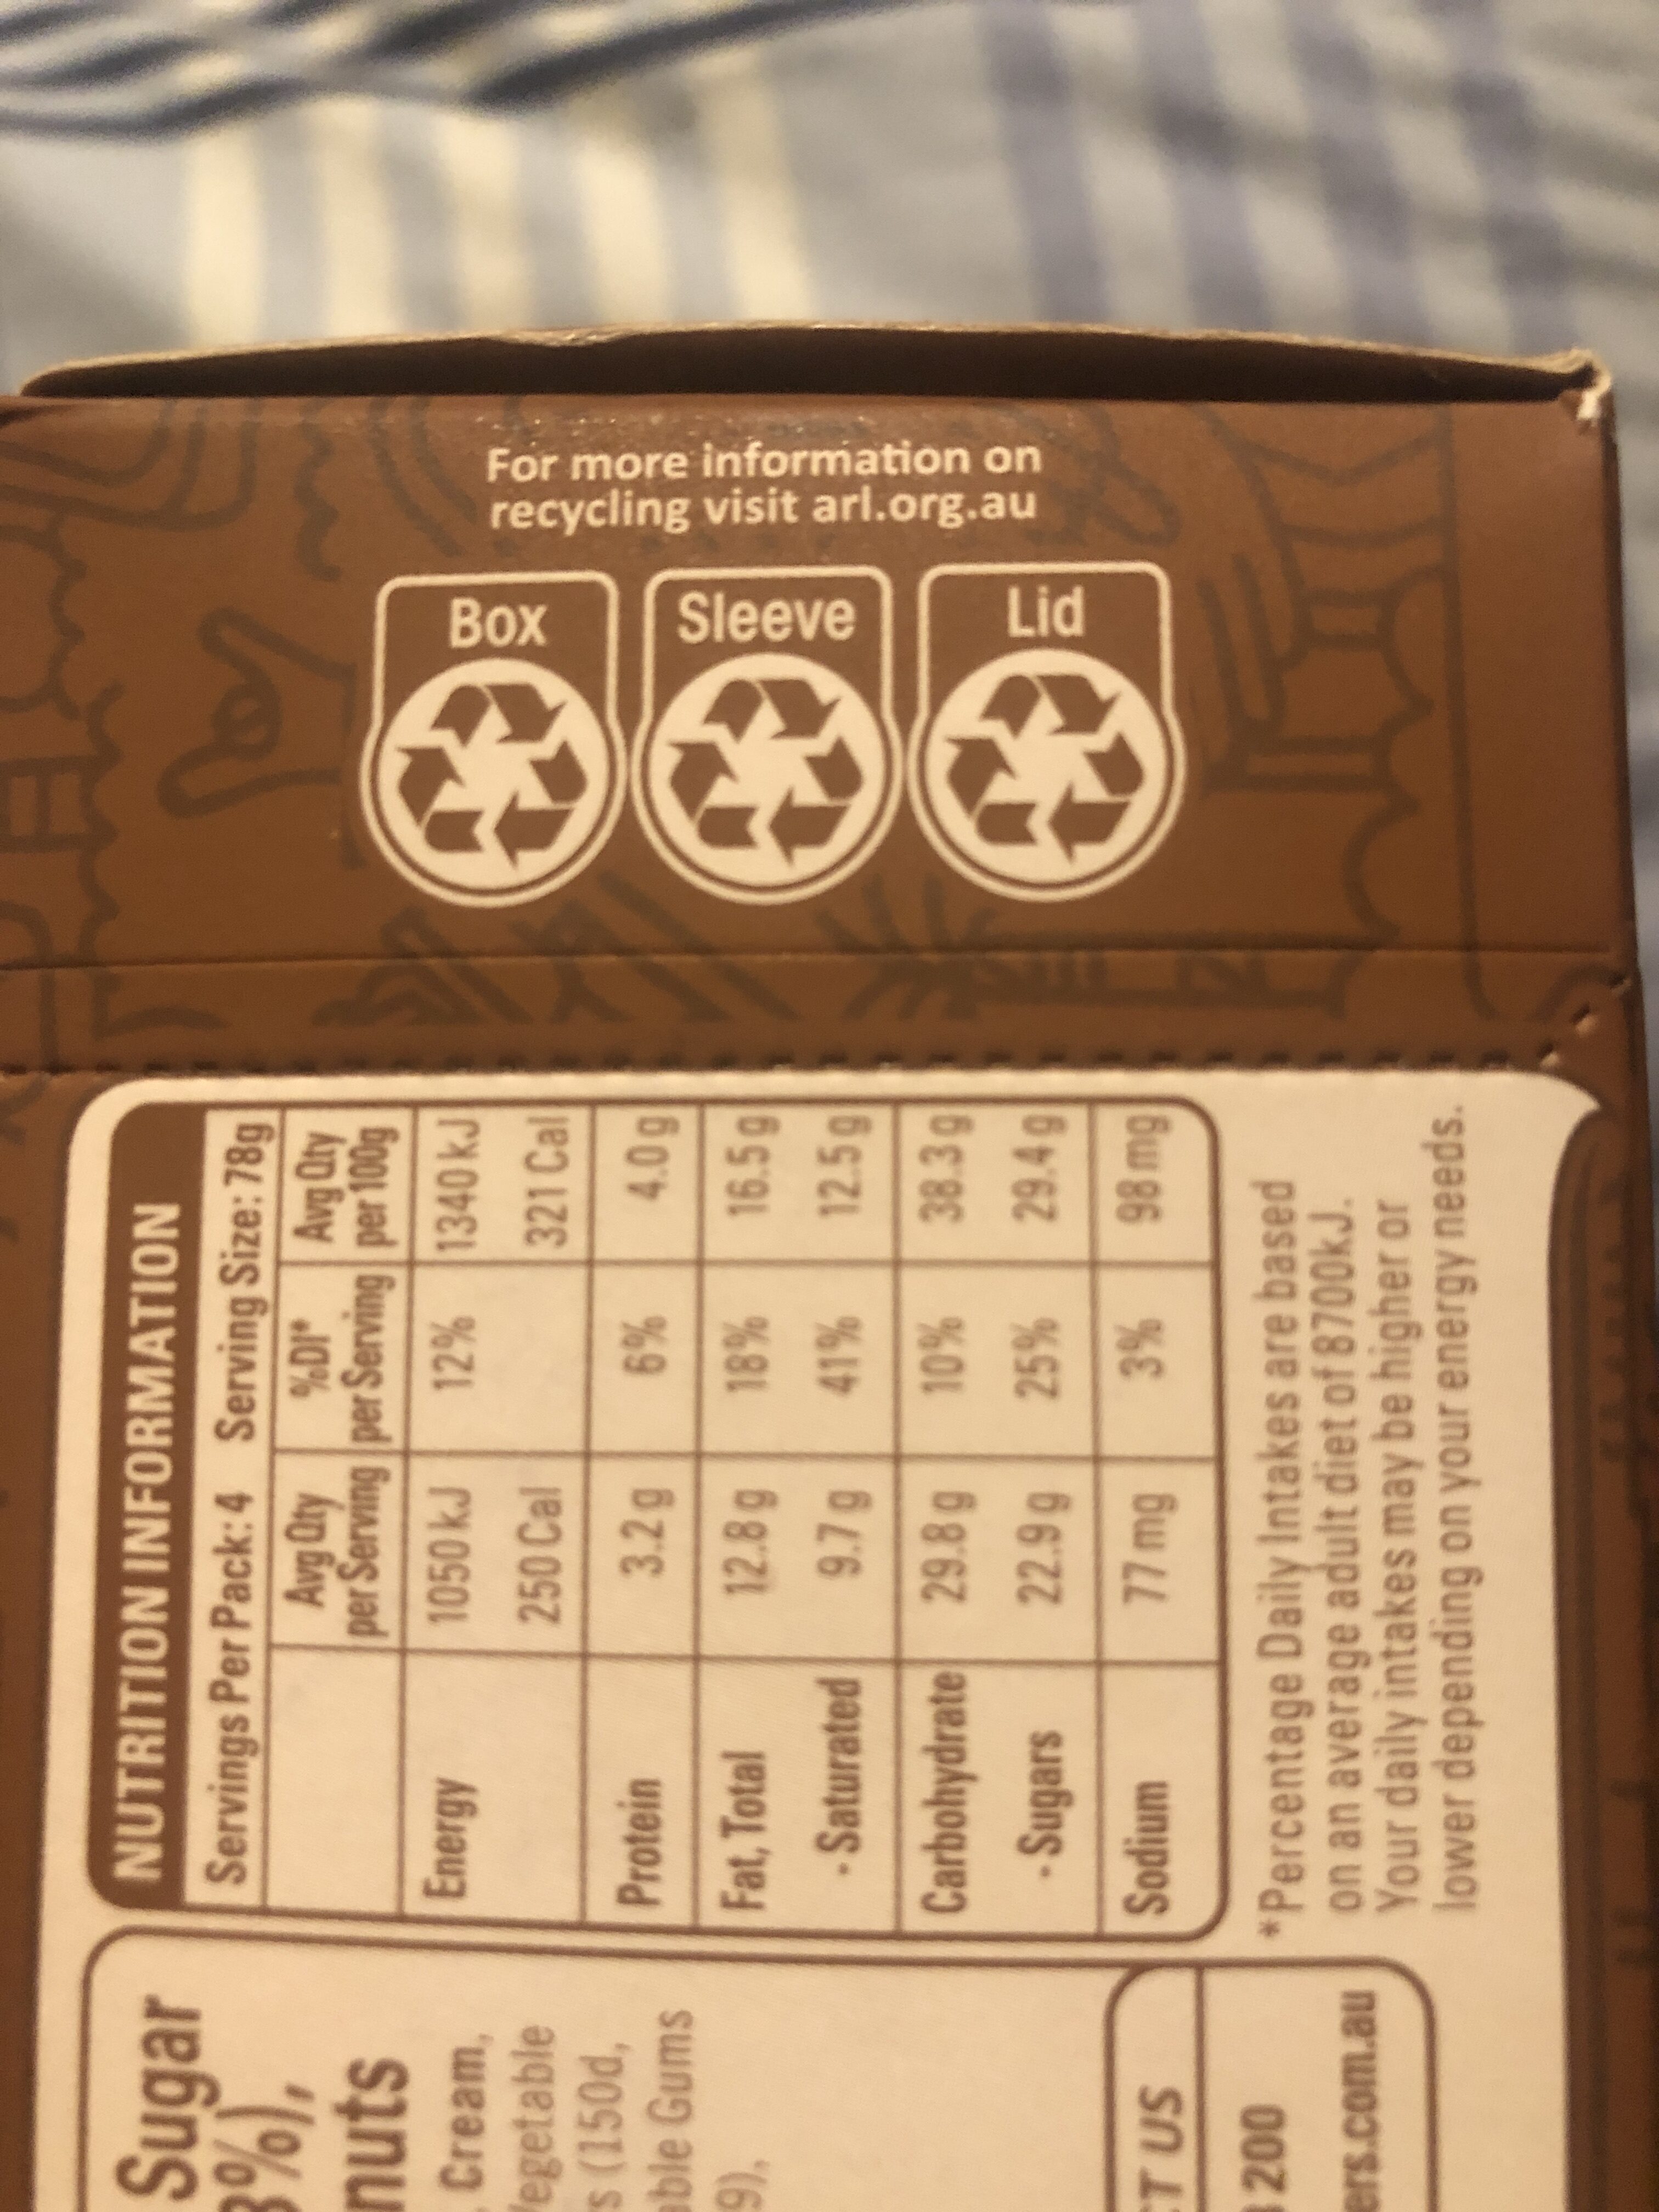 Super Choc Drumstick - Recycling instructions and/or packaging information